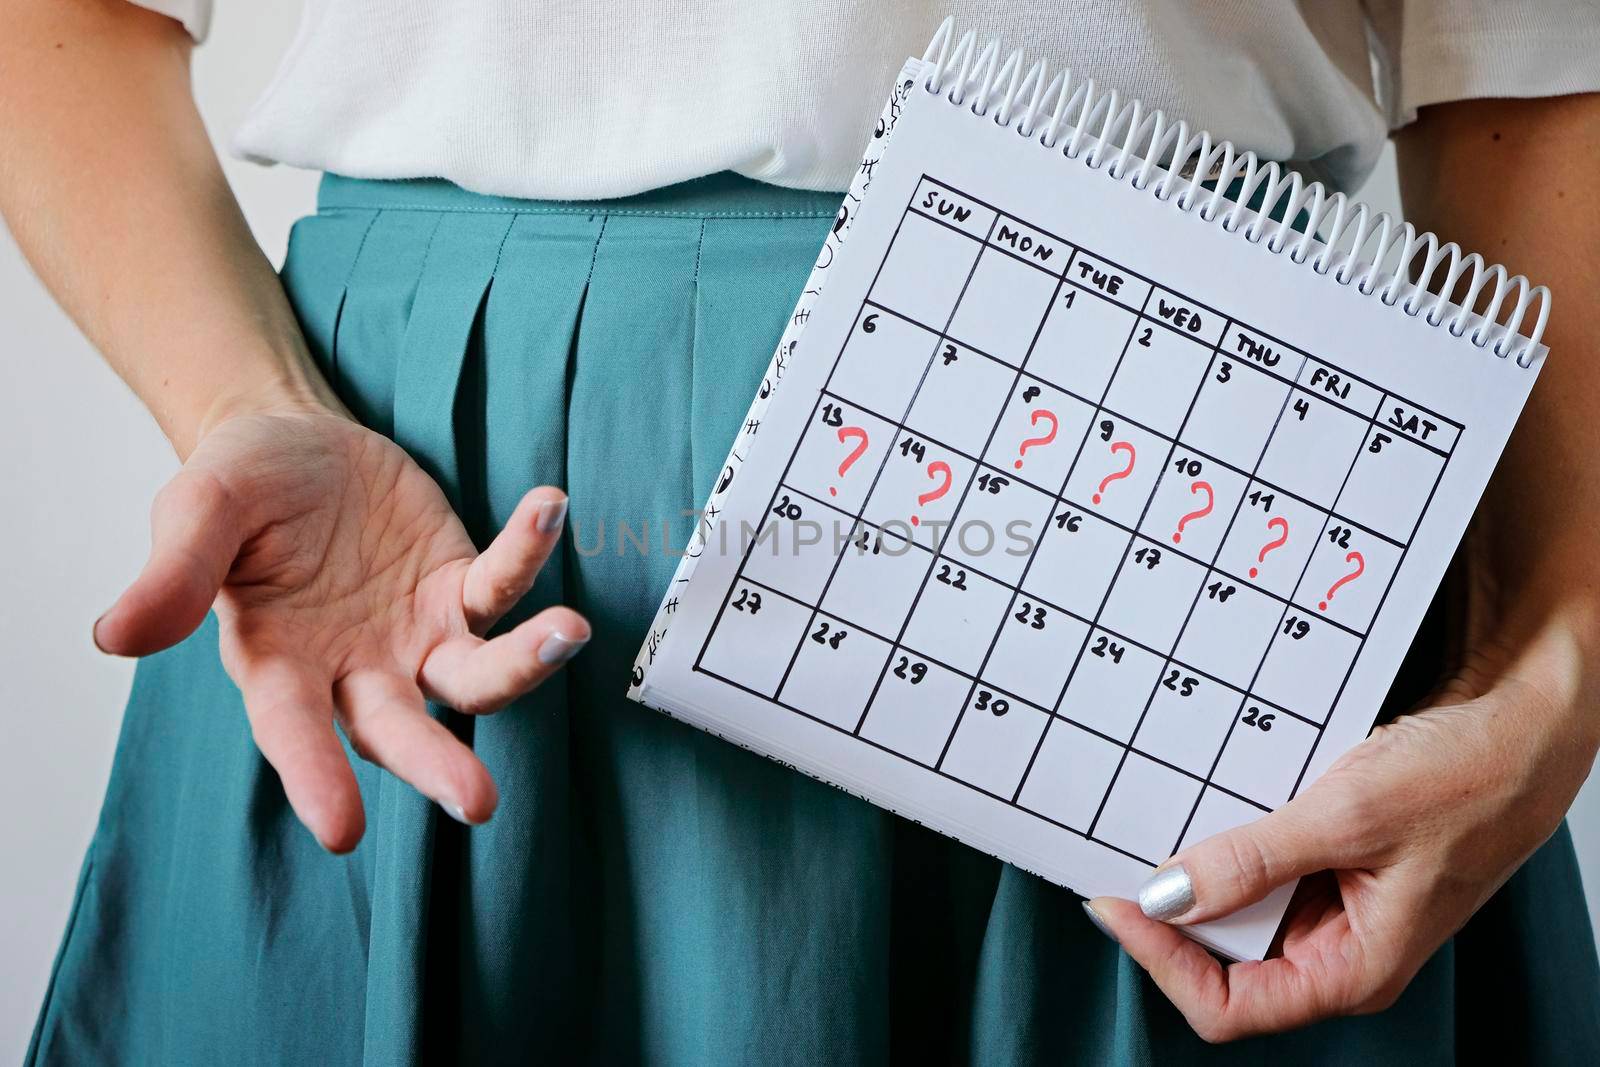 Woman holding calender with marked missed period. Unwanted pregnancy, woman's health and delay in menstruation causes.